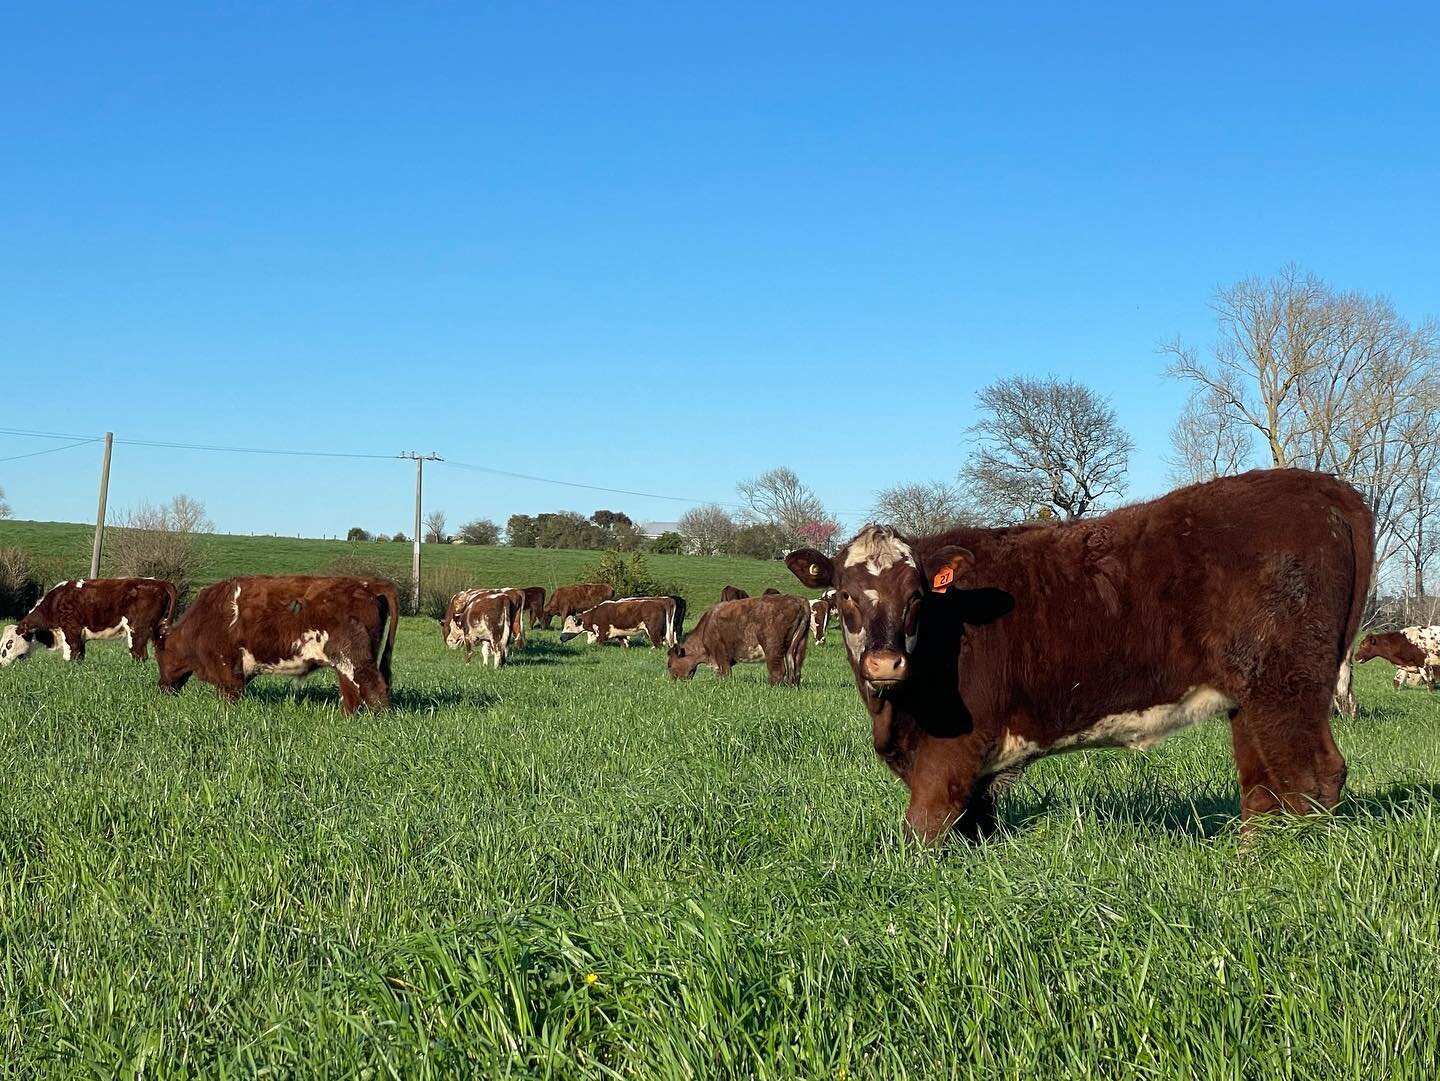 A stunning spring like day. Our herd are loving the fresh grass in their bellies and warmth on their backs